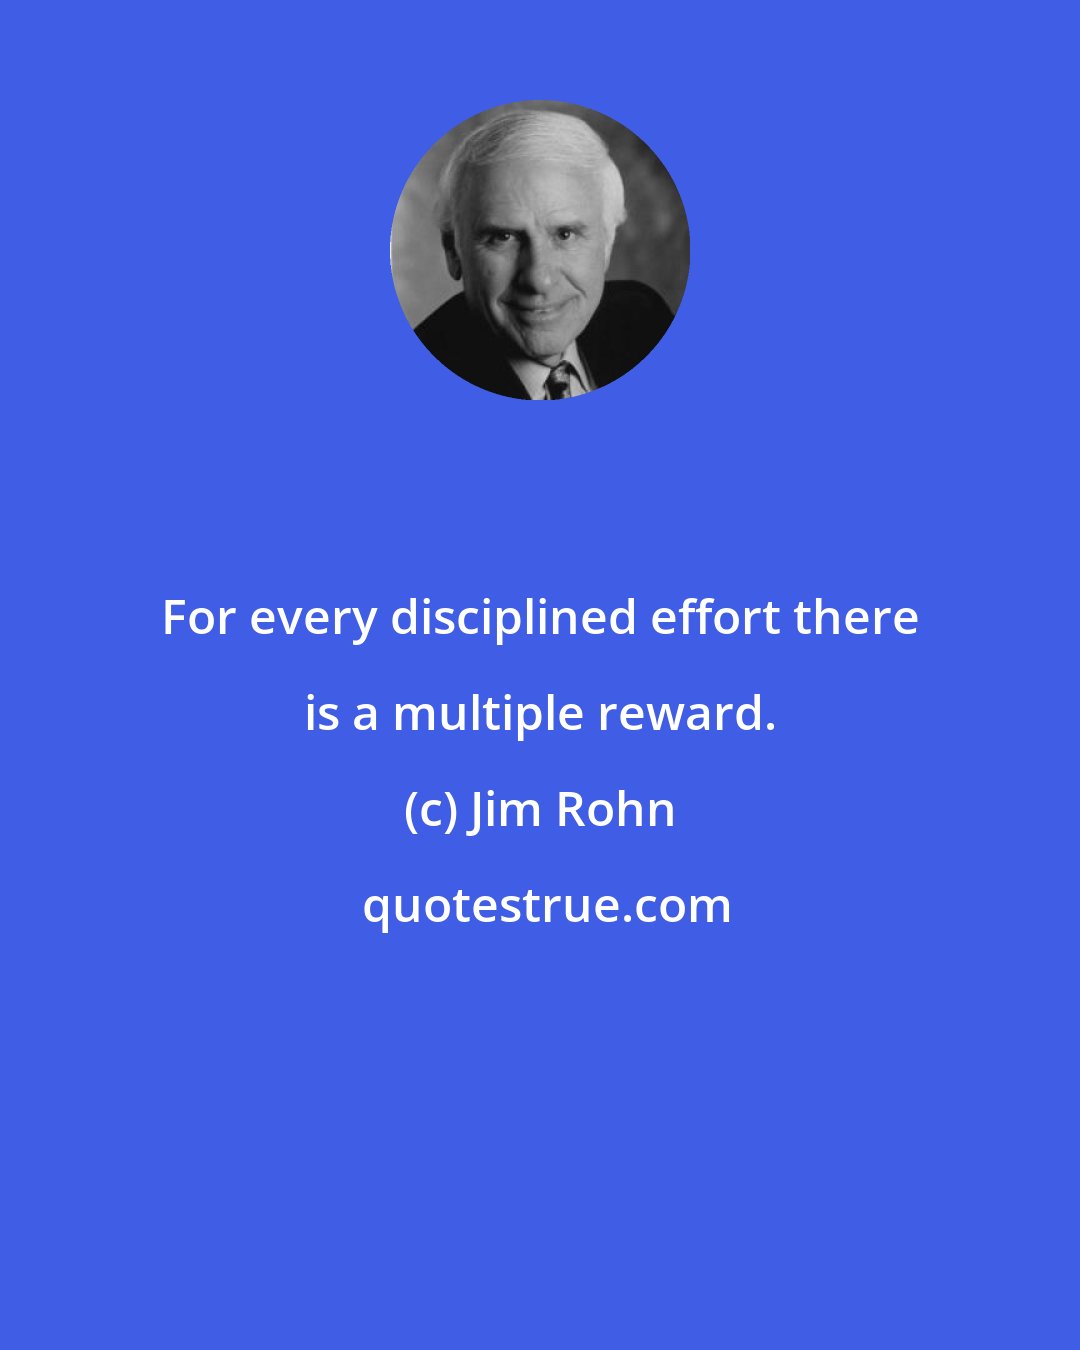 Jim Rohn: For every disciplined effort there is a multiple reward.